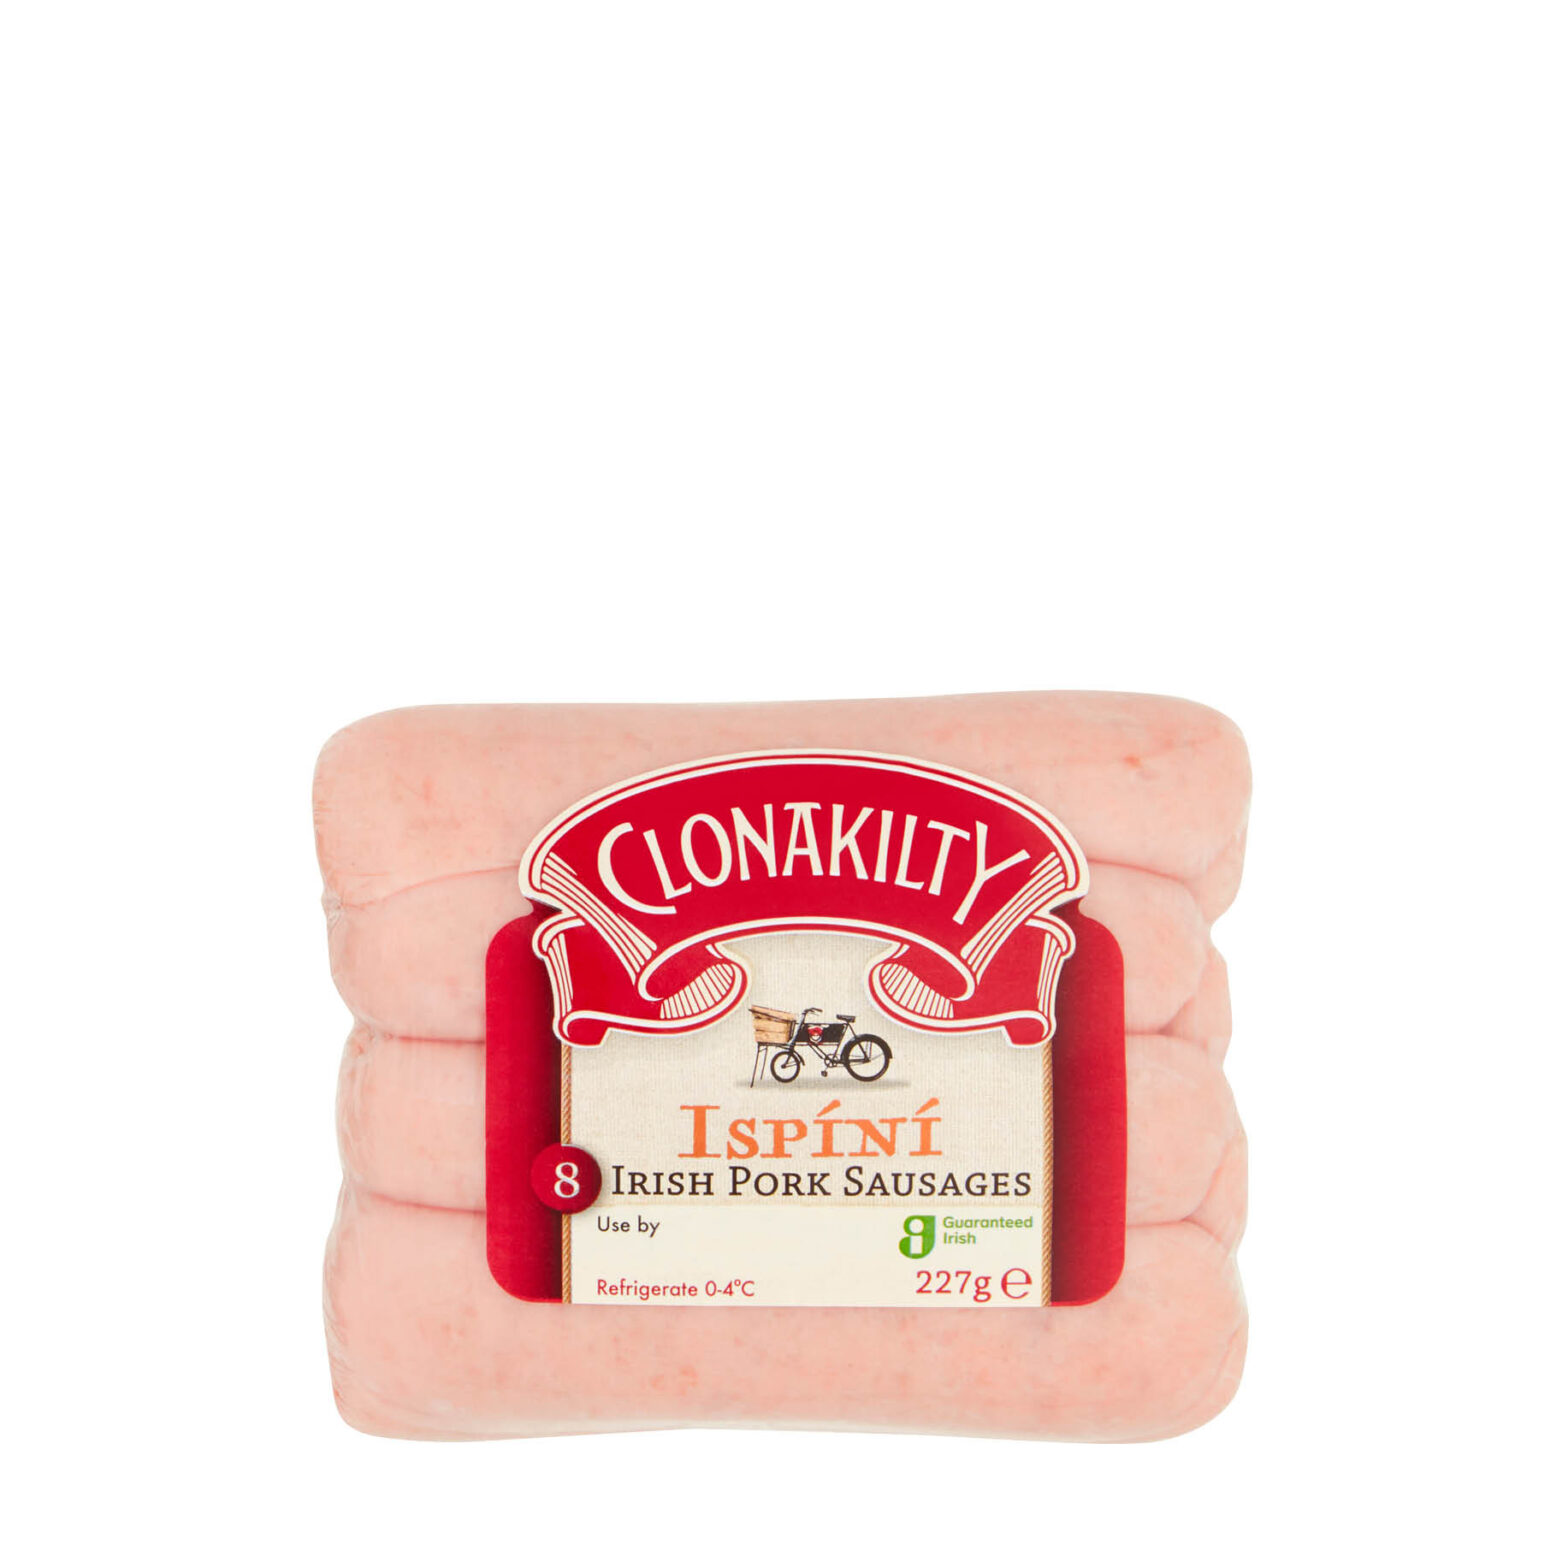 Clonakilty Sausages 8 Pack